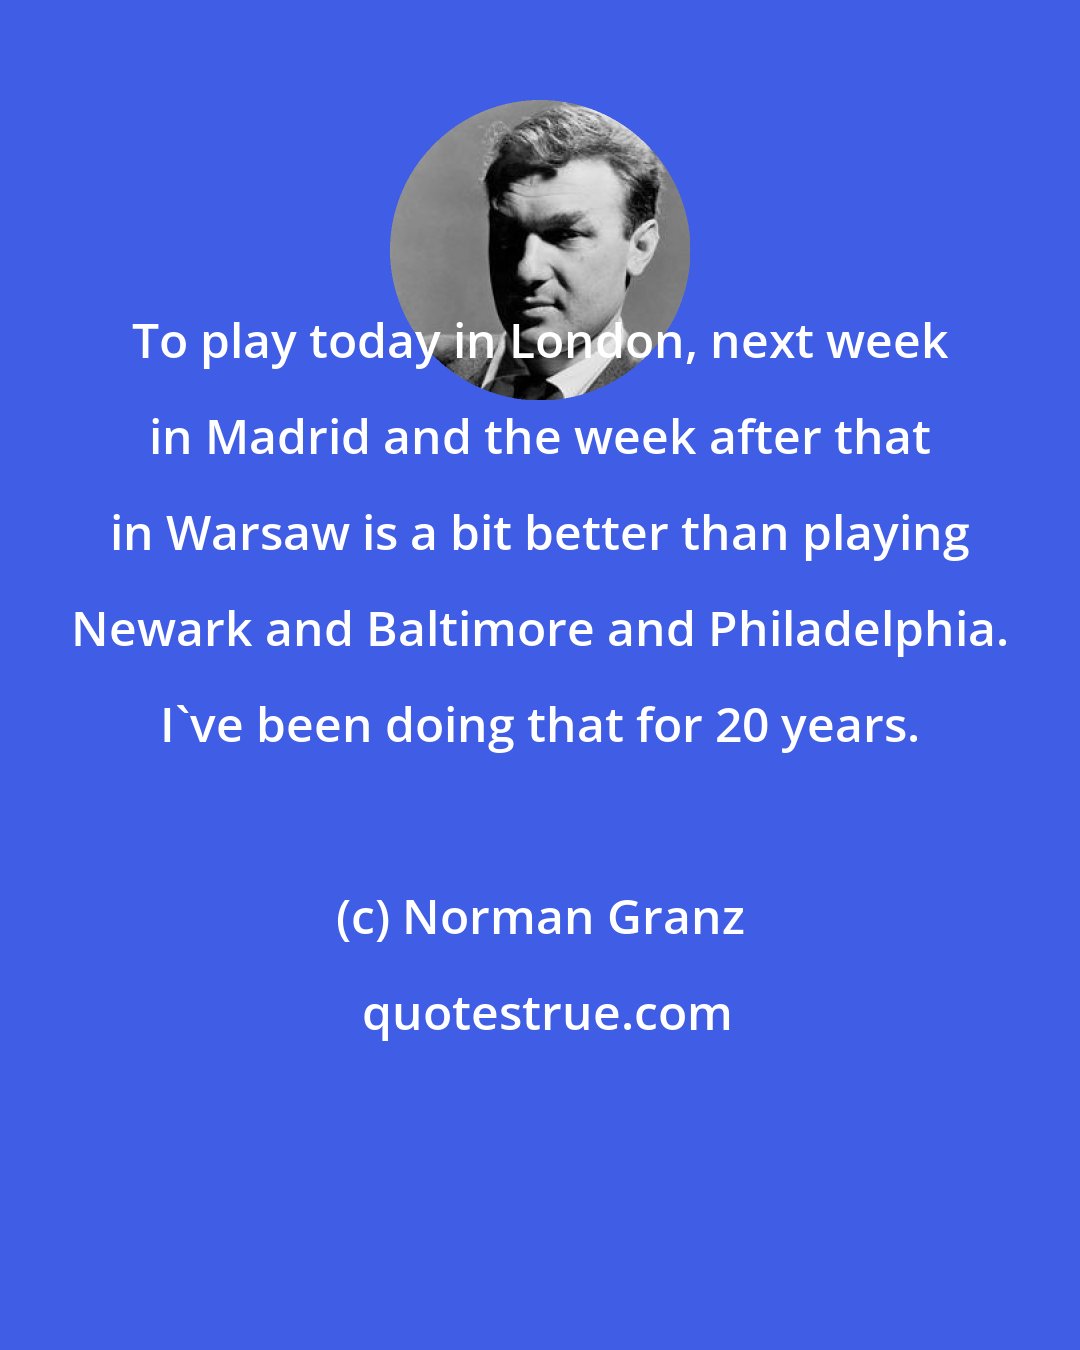 Norman Granz: To play today in London, next week in Madrid and the week after that in Warsaw is a bit better than playing Newark and Baltimore and Philadelphia. I've been doing that for 20 years.